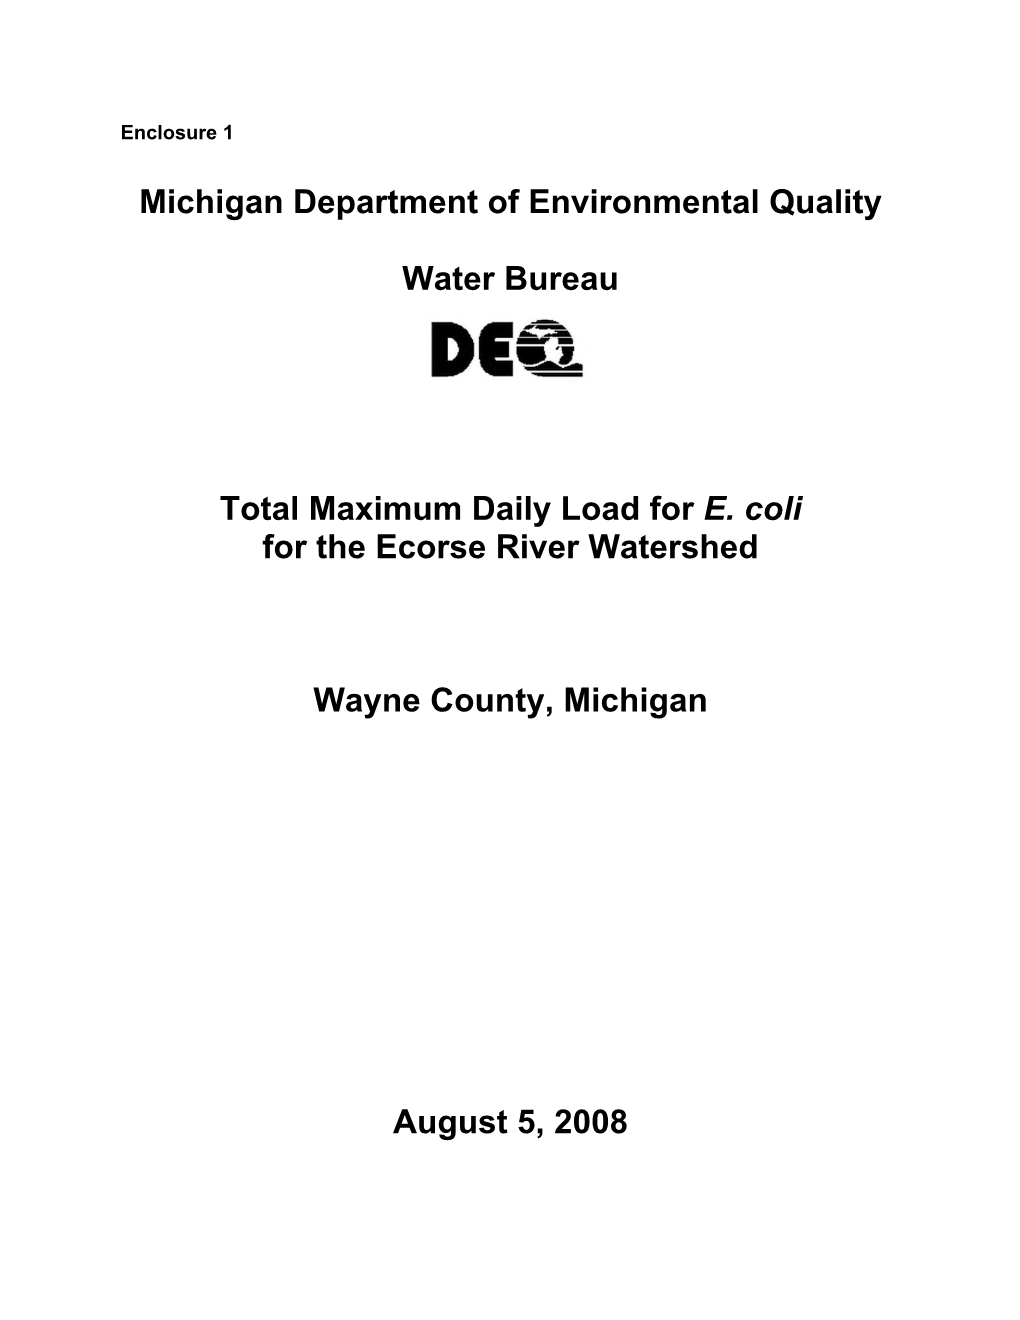 Total Maximum Daily Load for E. Coli for the Ecorse River Watershed